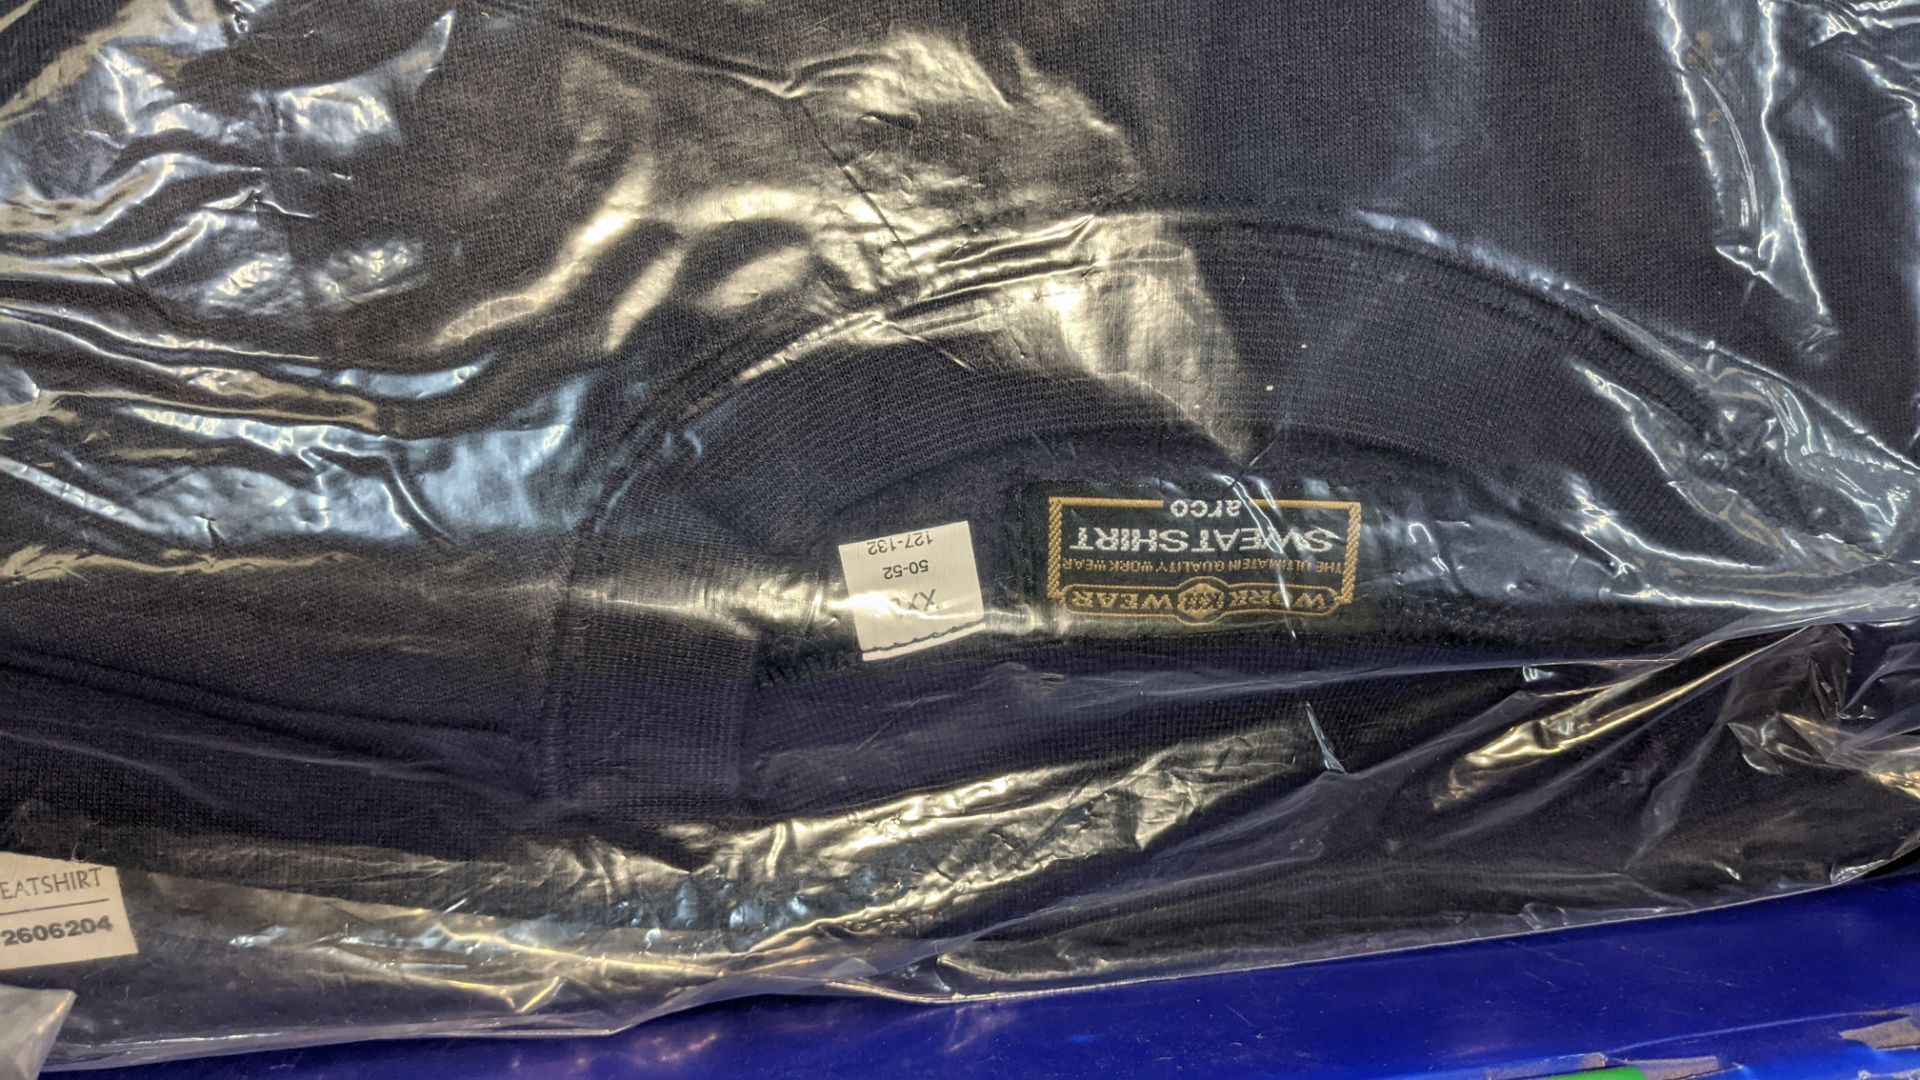 15 off workwear blue sweatshirts - the contents of 1 crate. NB crate excluded - Image 3 of 6